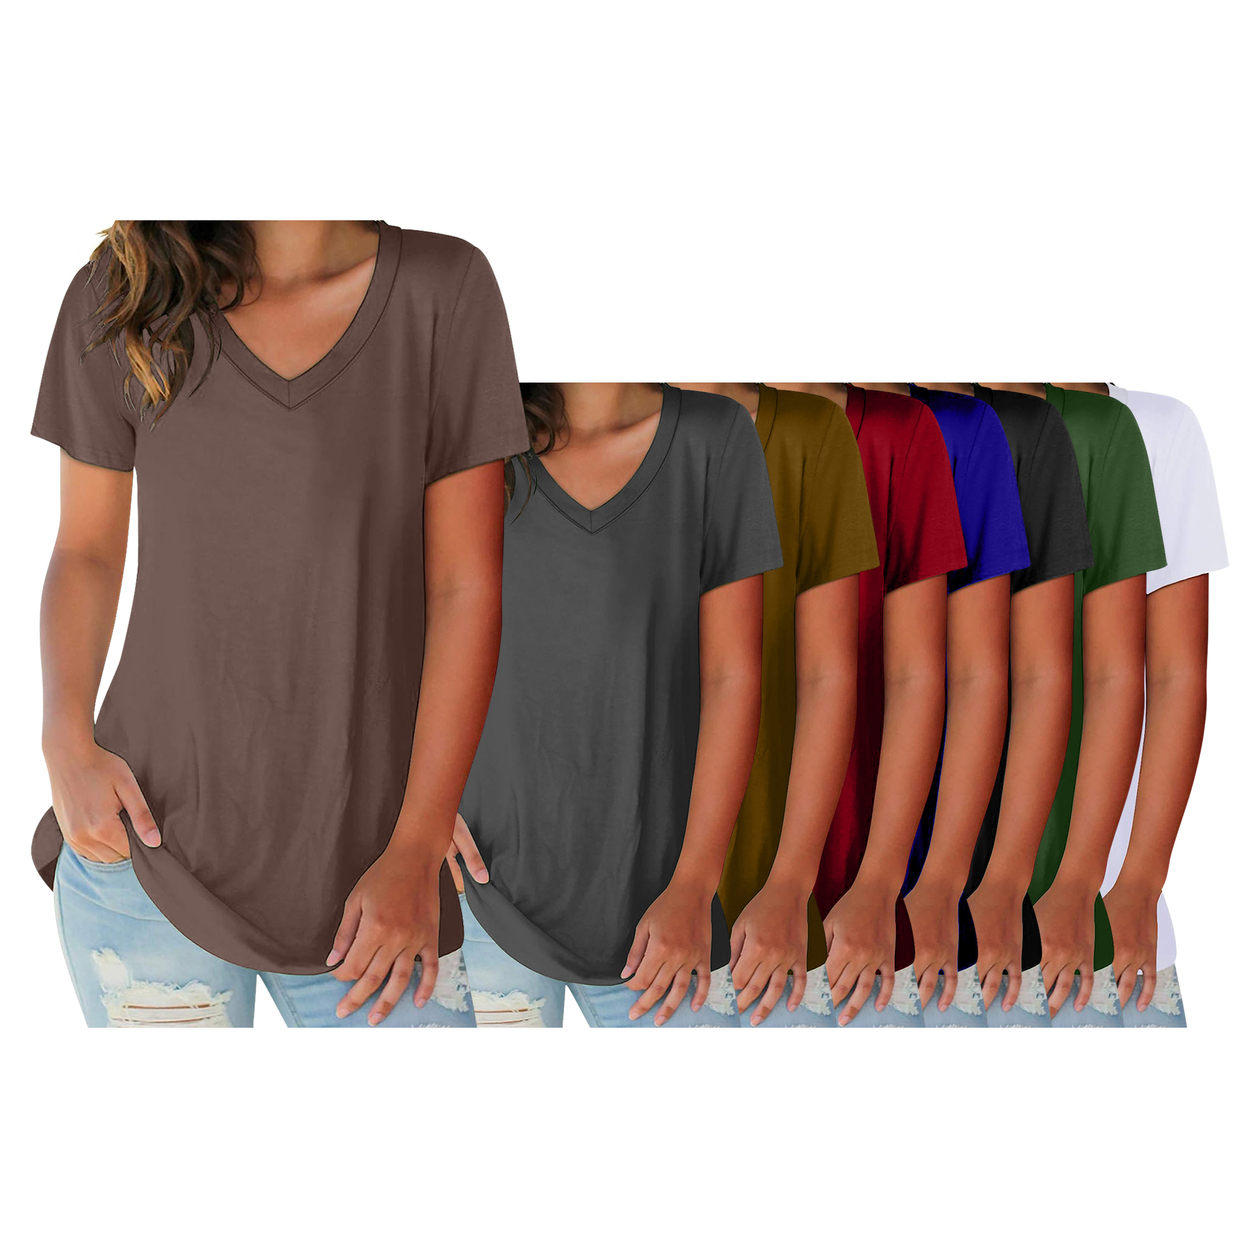 Women's Ultra-Soft Smooth Cotton Blend Basic V-Neck Short Sleeve Shirts - Brown, Small